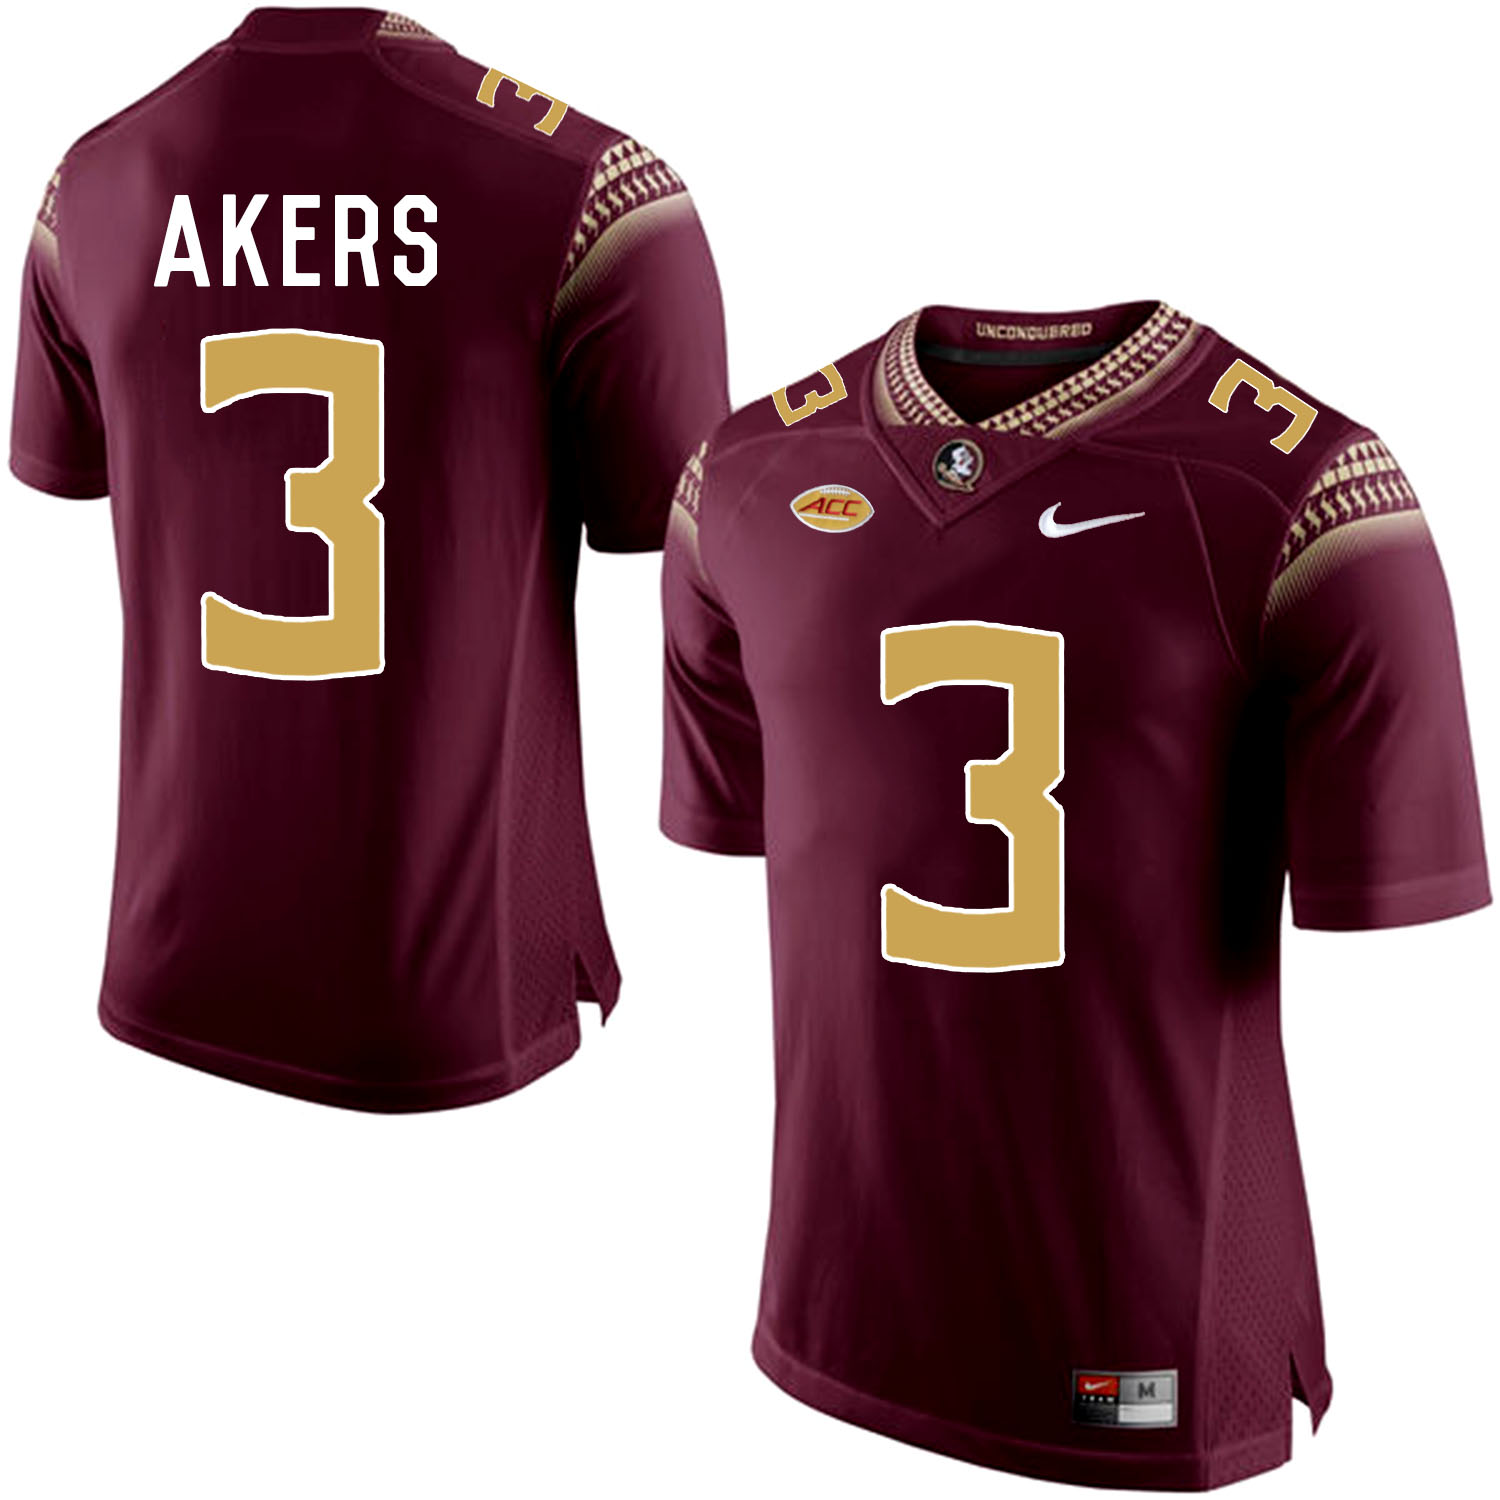 Florida State Seminoles 3 Cam Akers Red College Football Jersey